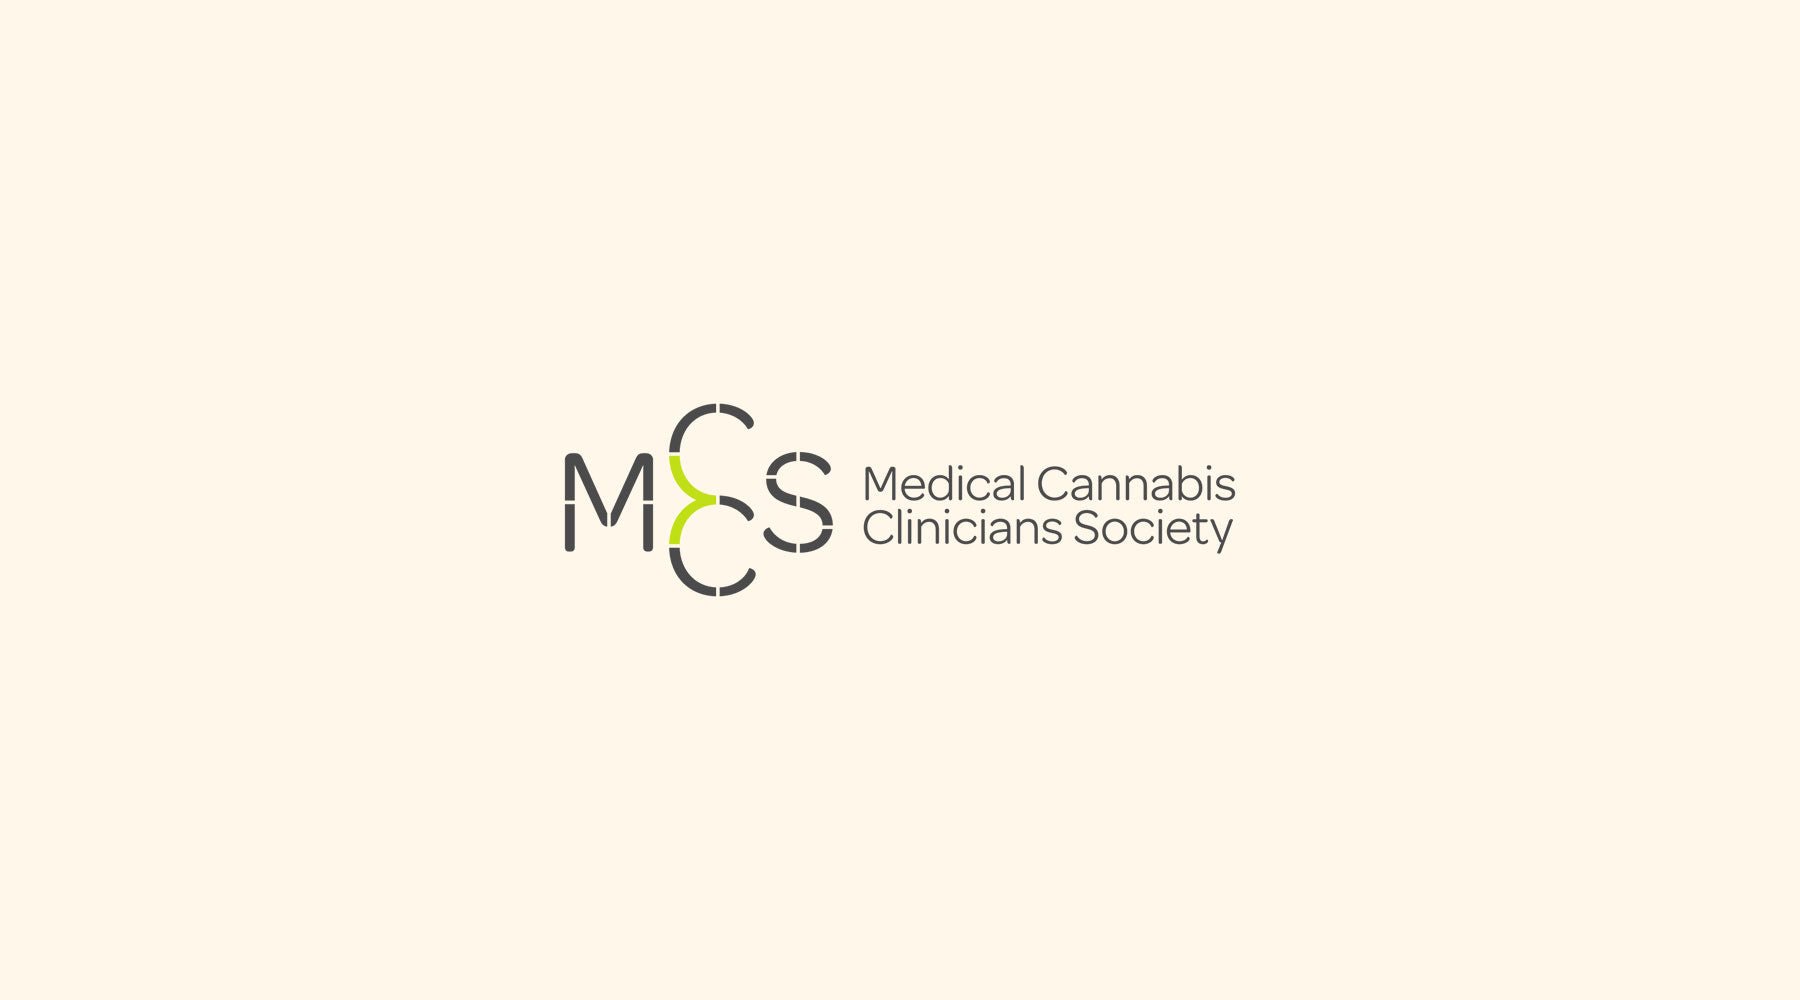 KLORIS Products Meet Medical Cannabis Clinicians Society Criteria for Excellence - KLORIS